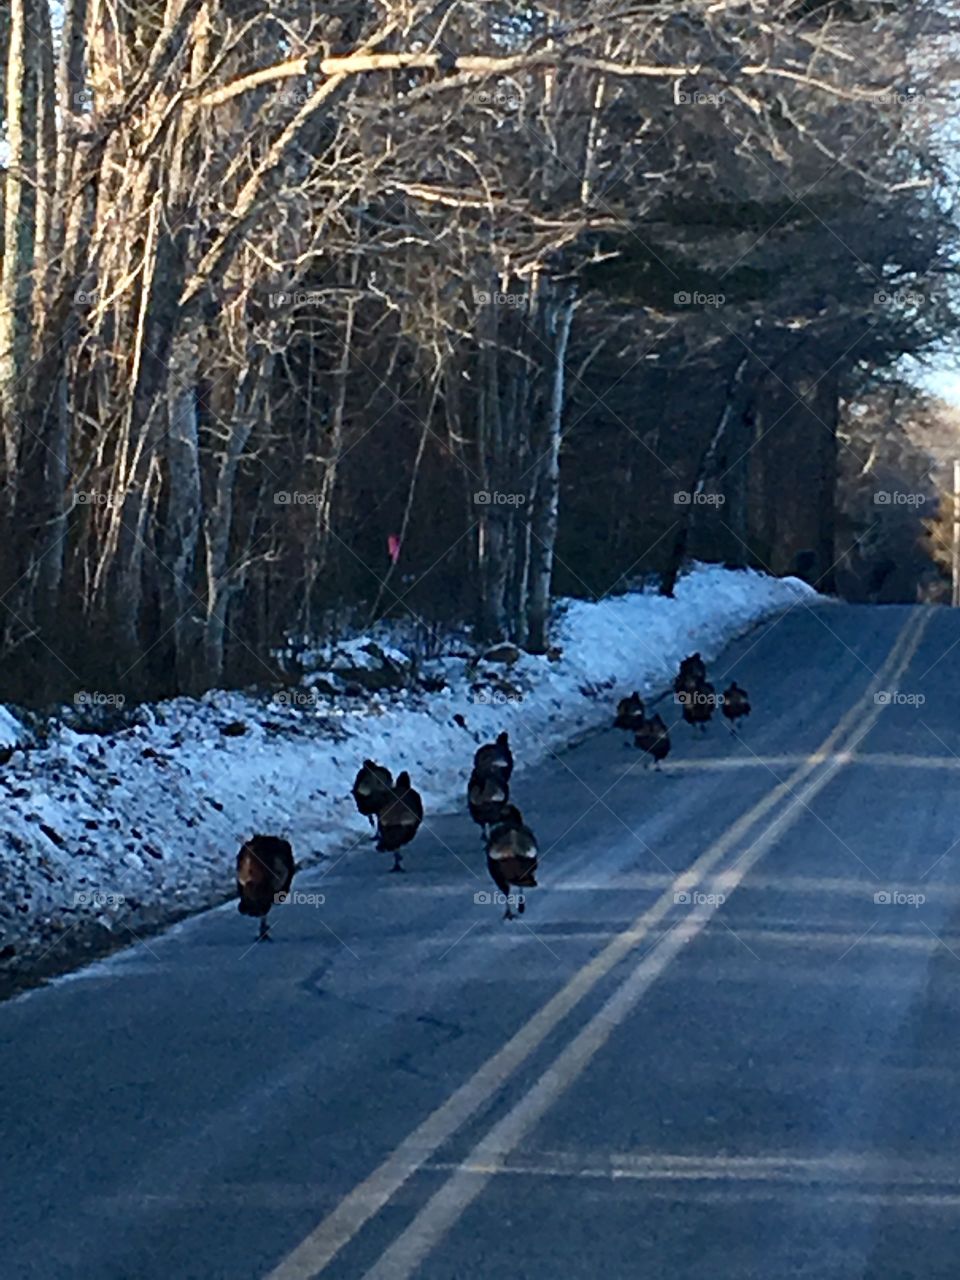 Wild Turkeys On New England Road, Sunset

Taking a ride nearing late afternoon in Winter, a rafter of wild turkeys ran across the road in front of us. Having my phone handy, I took this photo!🦃🦃🦃🦃🦃